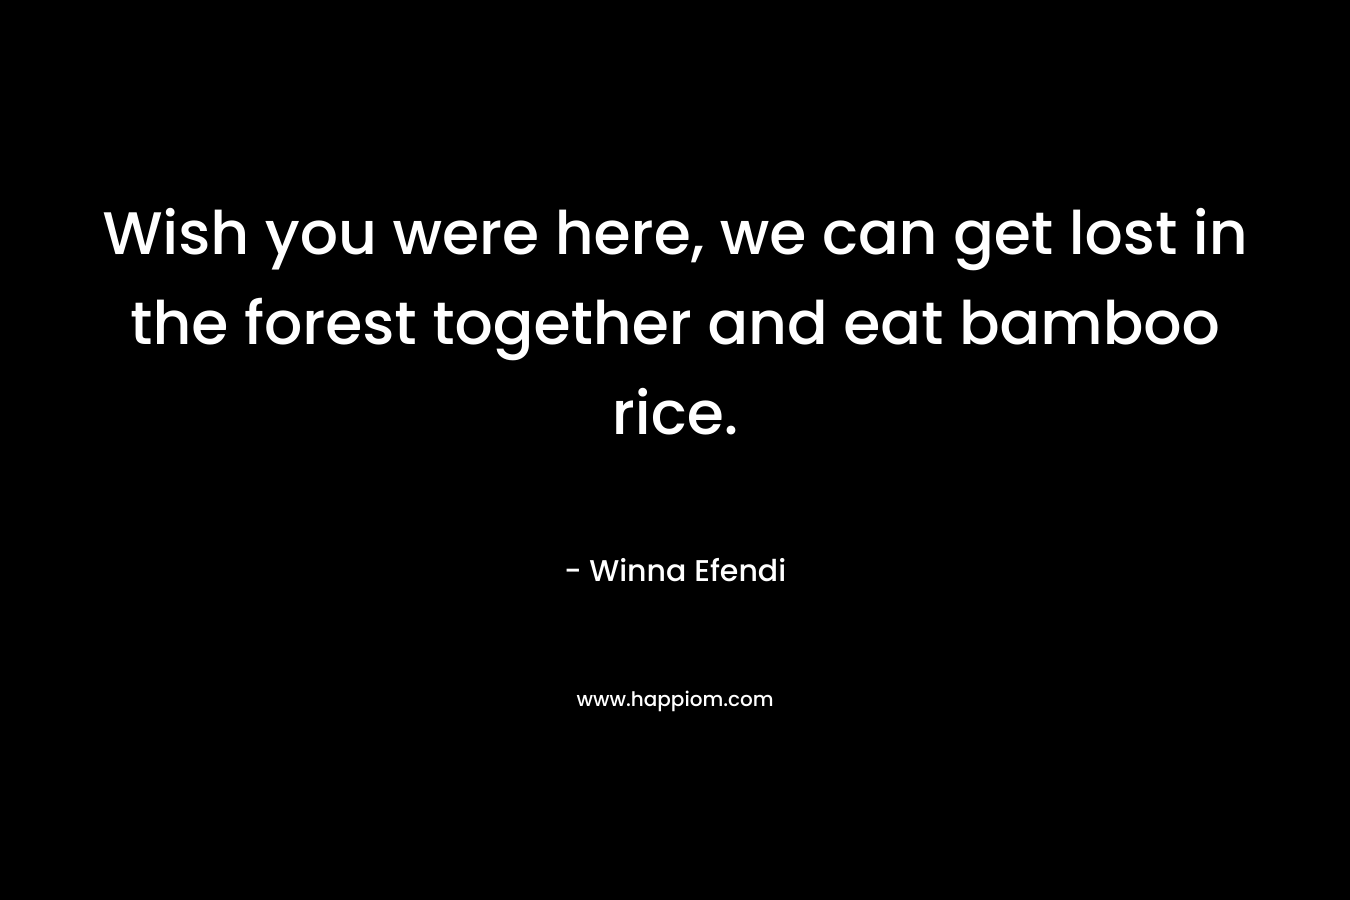 Wish you were here, we can get lost in the forest together and eat bamboo rice. – Winna Efendi